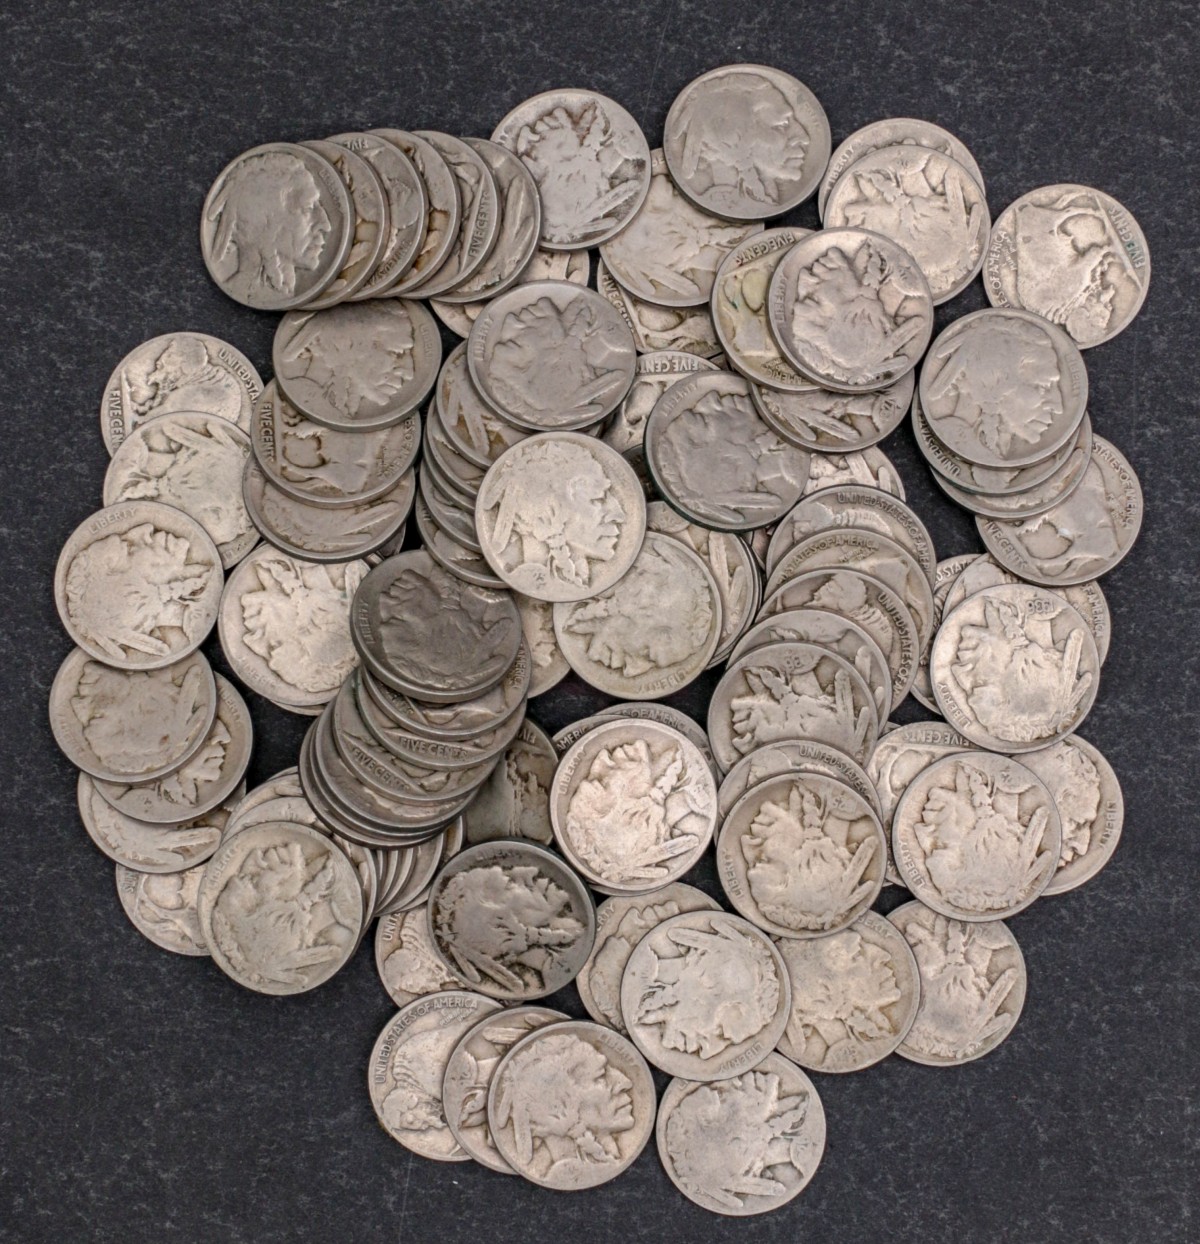 100 BUFFALO NICKELS WITH FAINT OR NO DATE